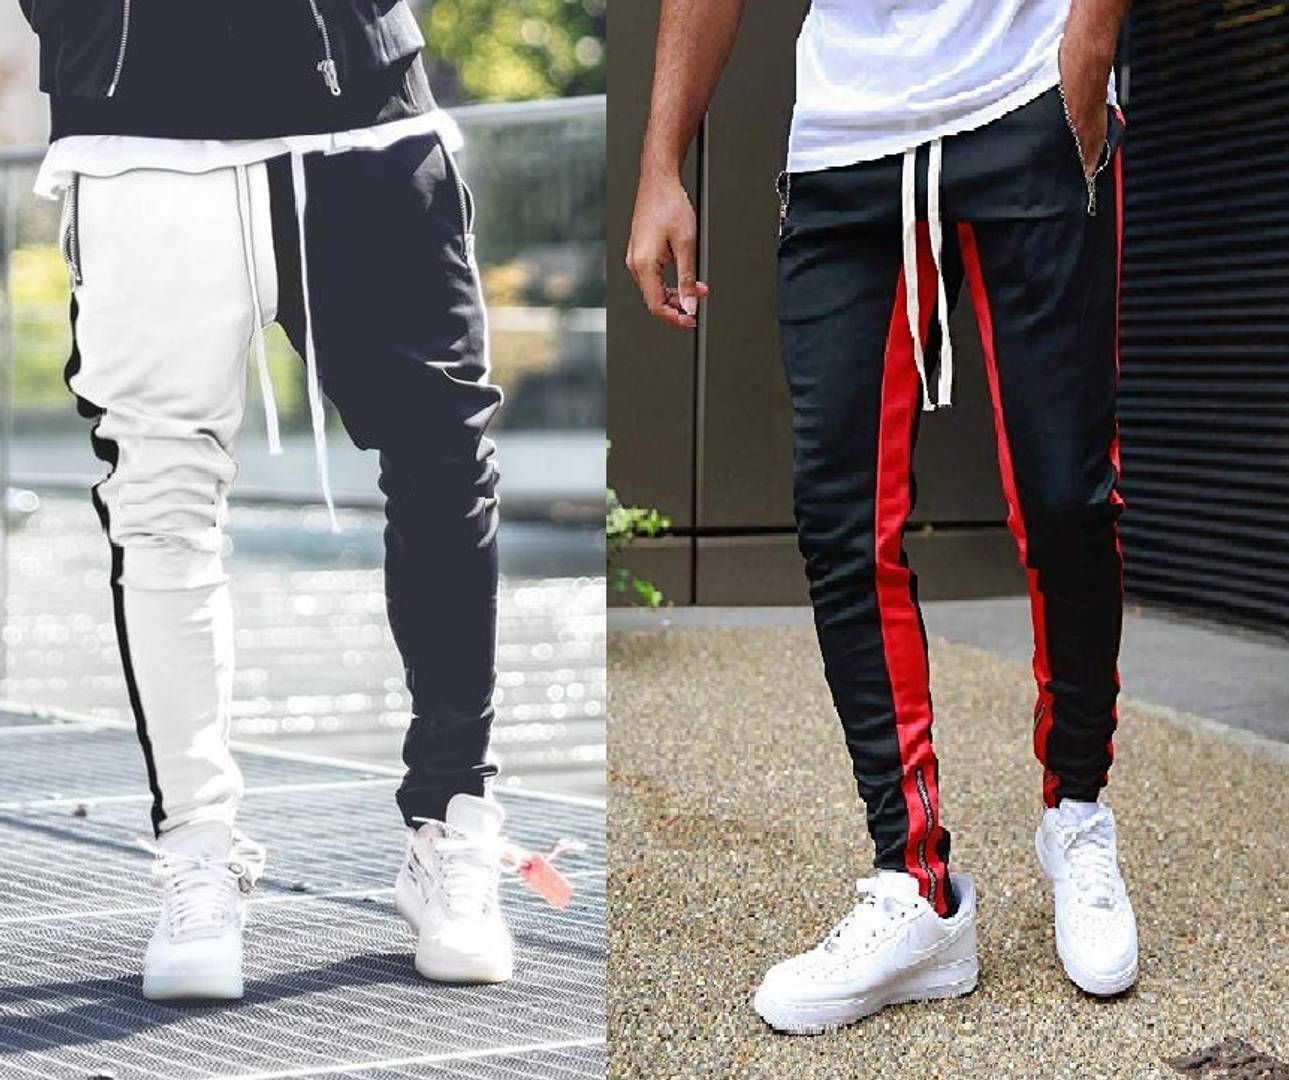 Stylish Multicoloured Cotton Lycra Solid Regular Track Pants For Men-Pack Of 2